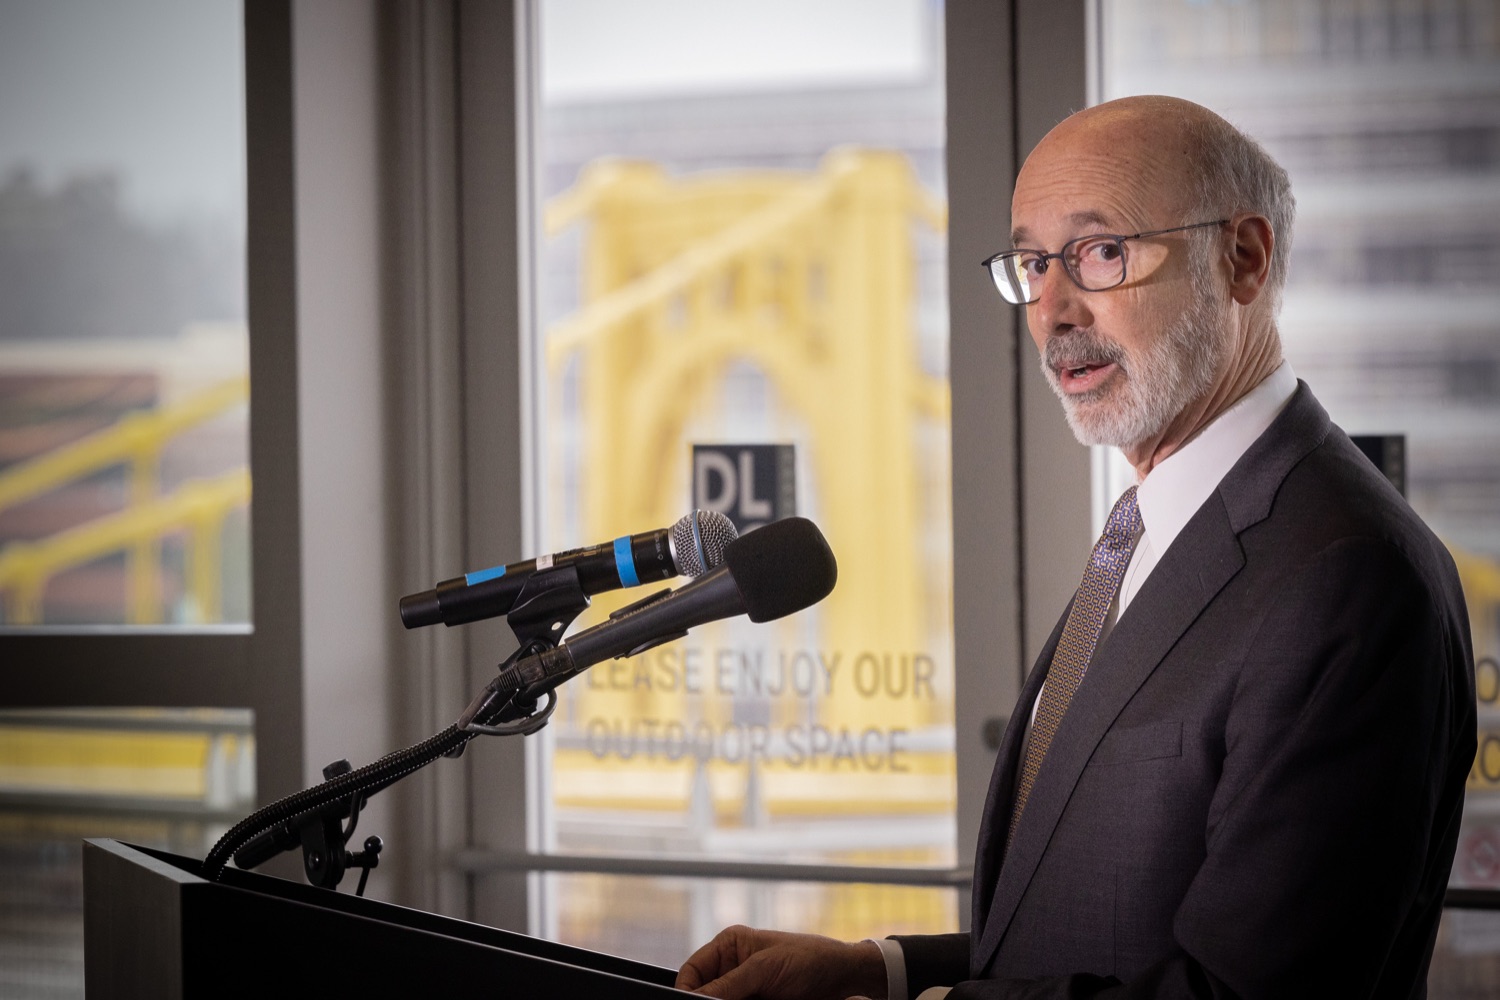 Pennsylvania Governor Tom Wolf speaks with the press.  Governor Tom Wolf and Pennsylvania Department of Transportation (PennDOT) Deputy Secretary for Multimodal Transportation Jennie Louwerse were joined by Federal Railroad Administration Administrator Amit Bose, Norfolk Southern (NS) Regional Vice President Rudy Husband and local officials today to announce that the federal Bipartisan Infrastructure Law (BIL) has paved the way for movement toward improved freight and passenger-rail service between Harrisburg and Pittsburgh. Pittsburgh, PA  February 18, 2022<br><a href="https://filesource.amperwave.net/commonwealthofpa/photo/20547_gov_infrastructure_dz_001.jpg" target="_blank">⇣ Download Photo</a>